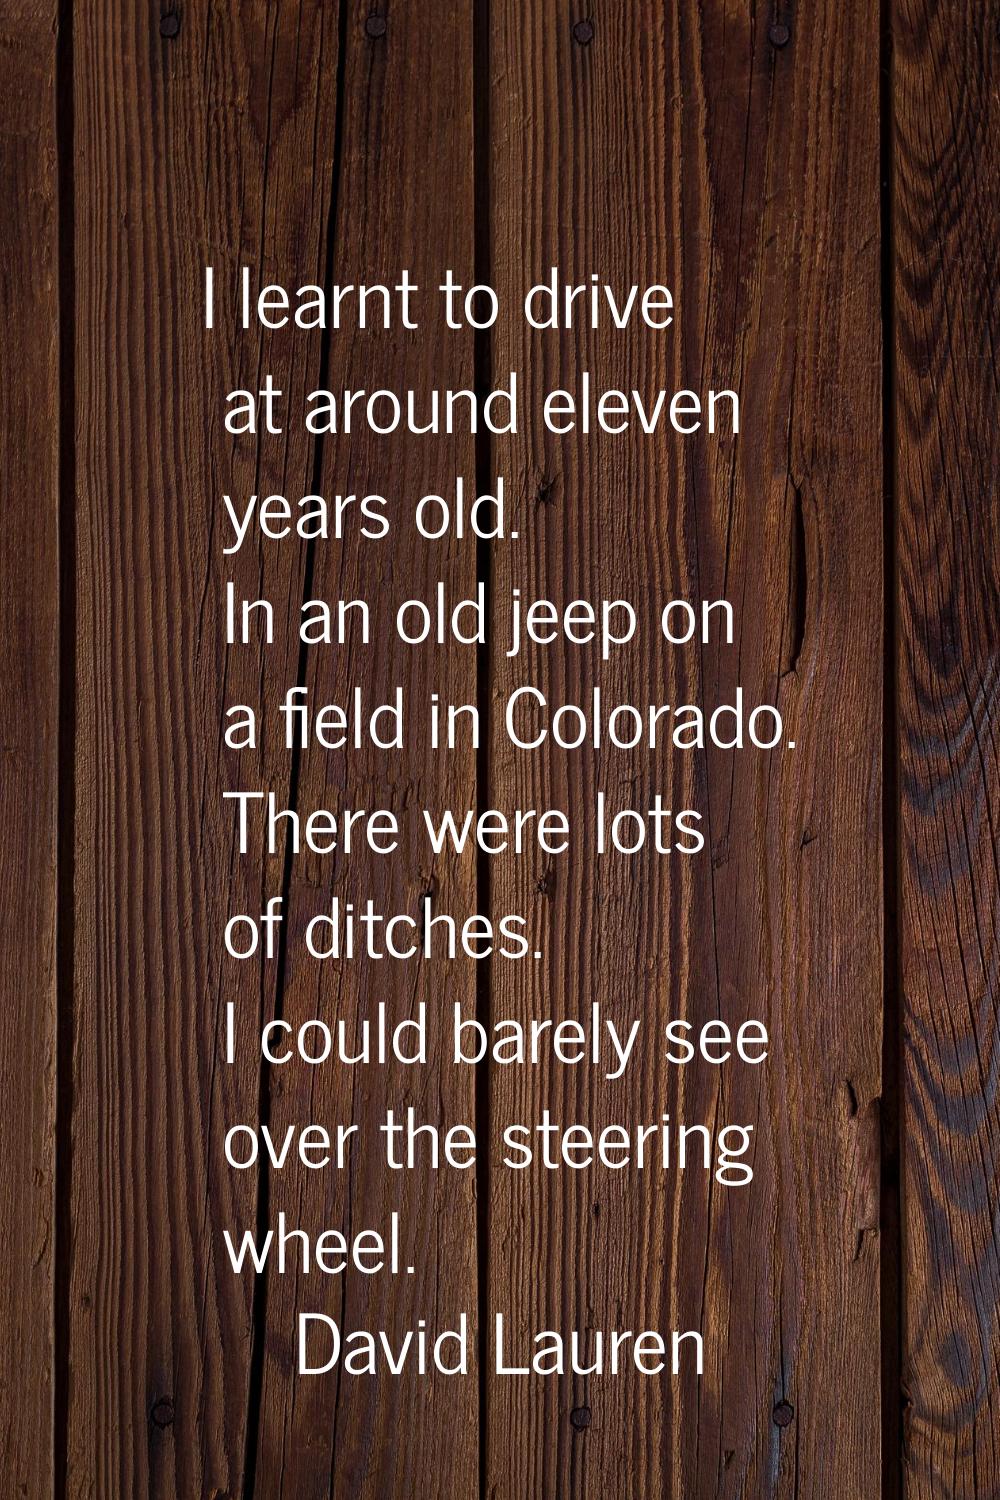 I learnt to drive at around eleven years old. In an old jeep on a field in Colorado. There were lot